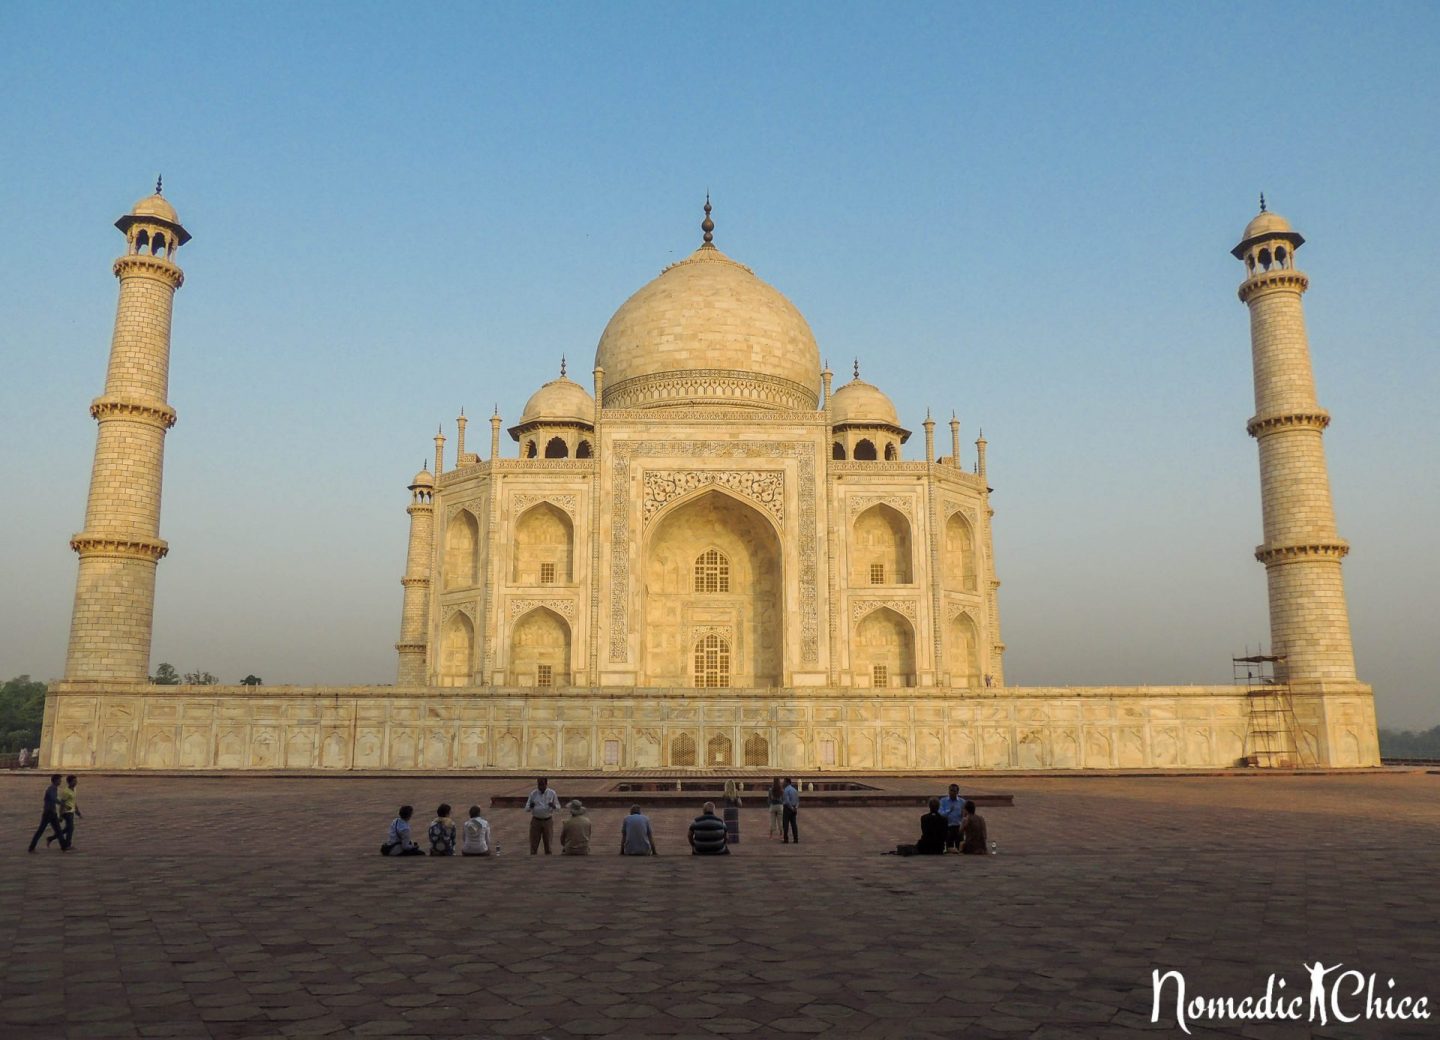 How to get the best pictures in the Taj Mahal